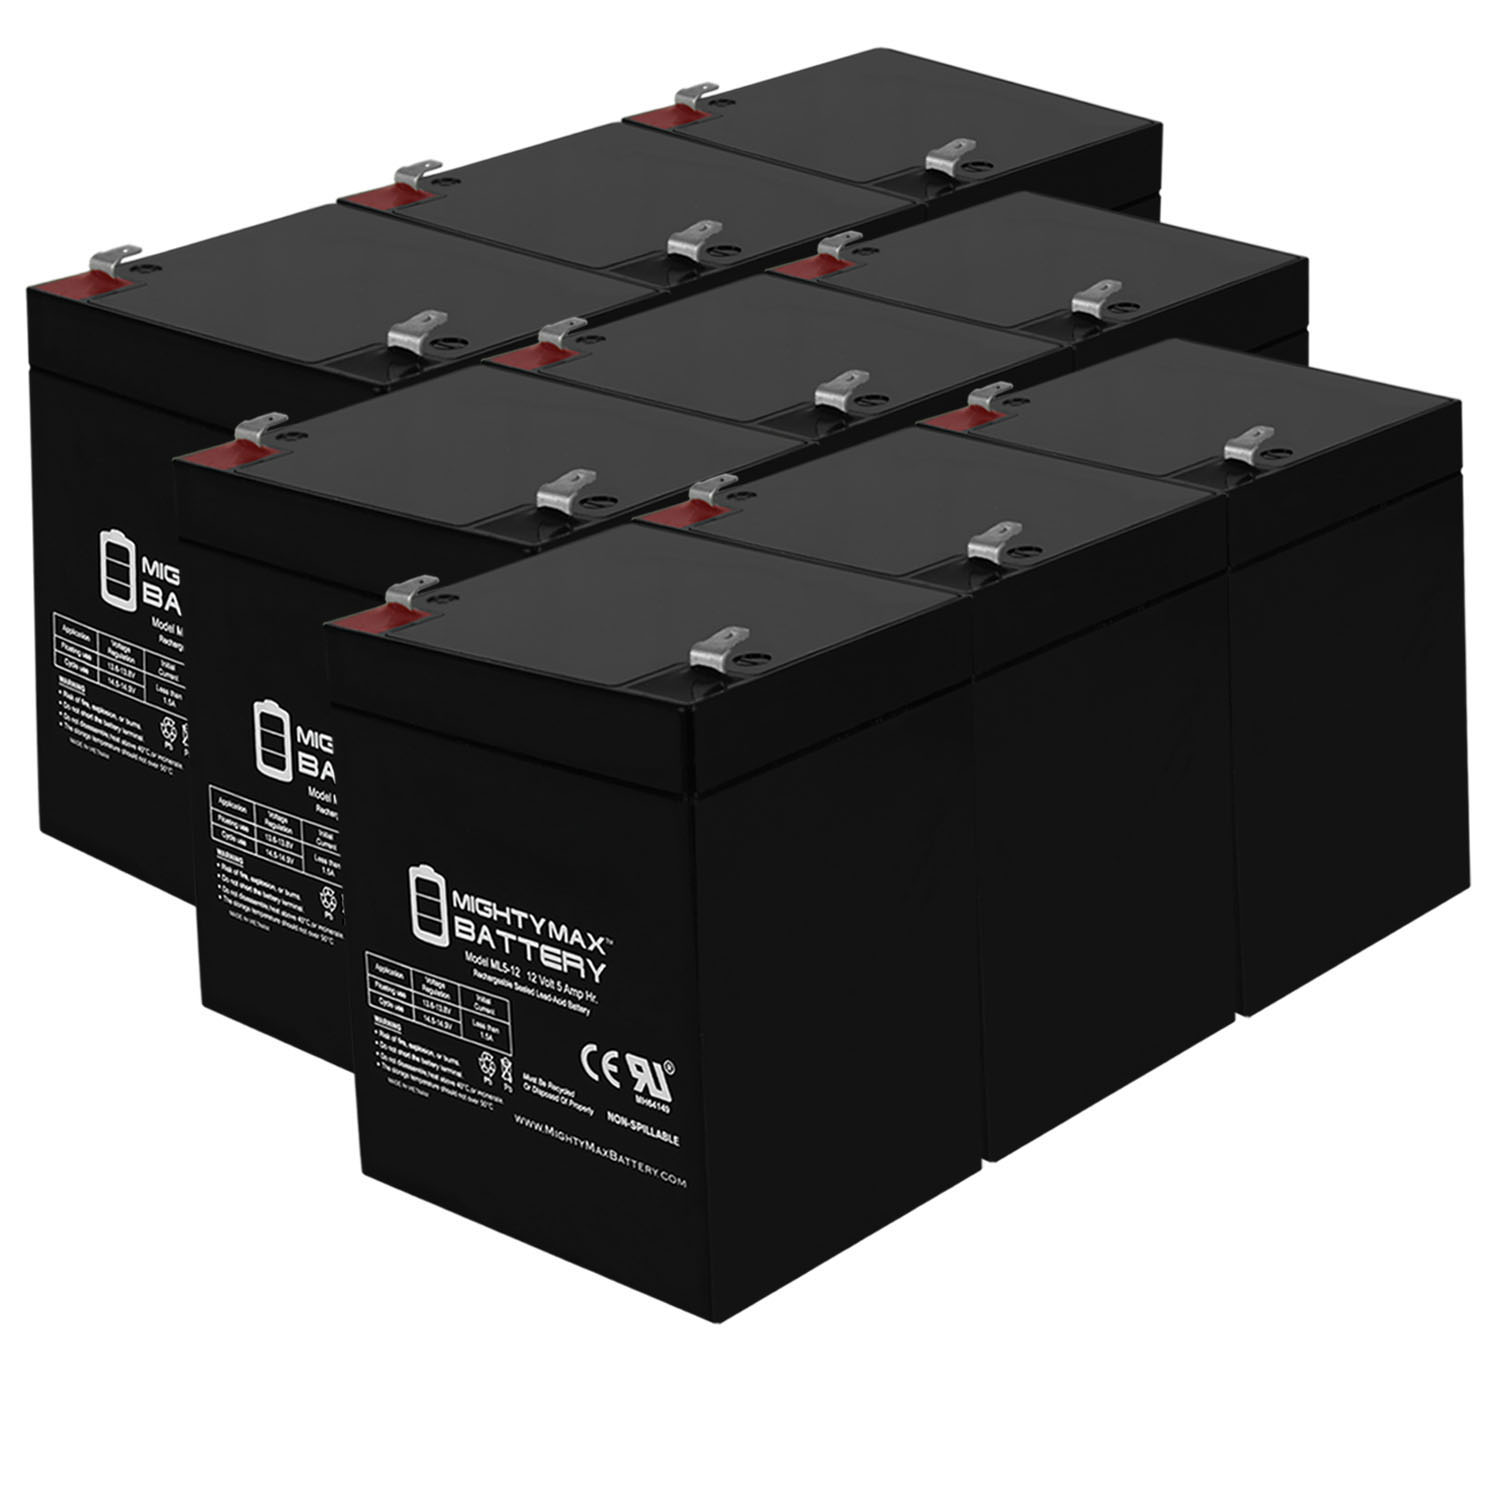 12V 5AH SLA Replacement Battery for Johnson Controls GC1240 - 9 Pack